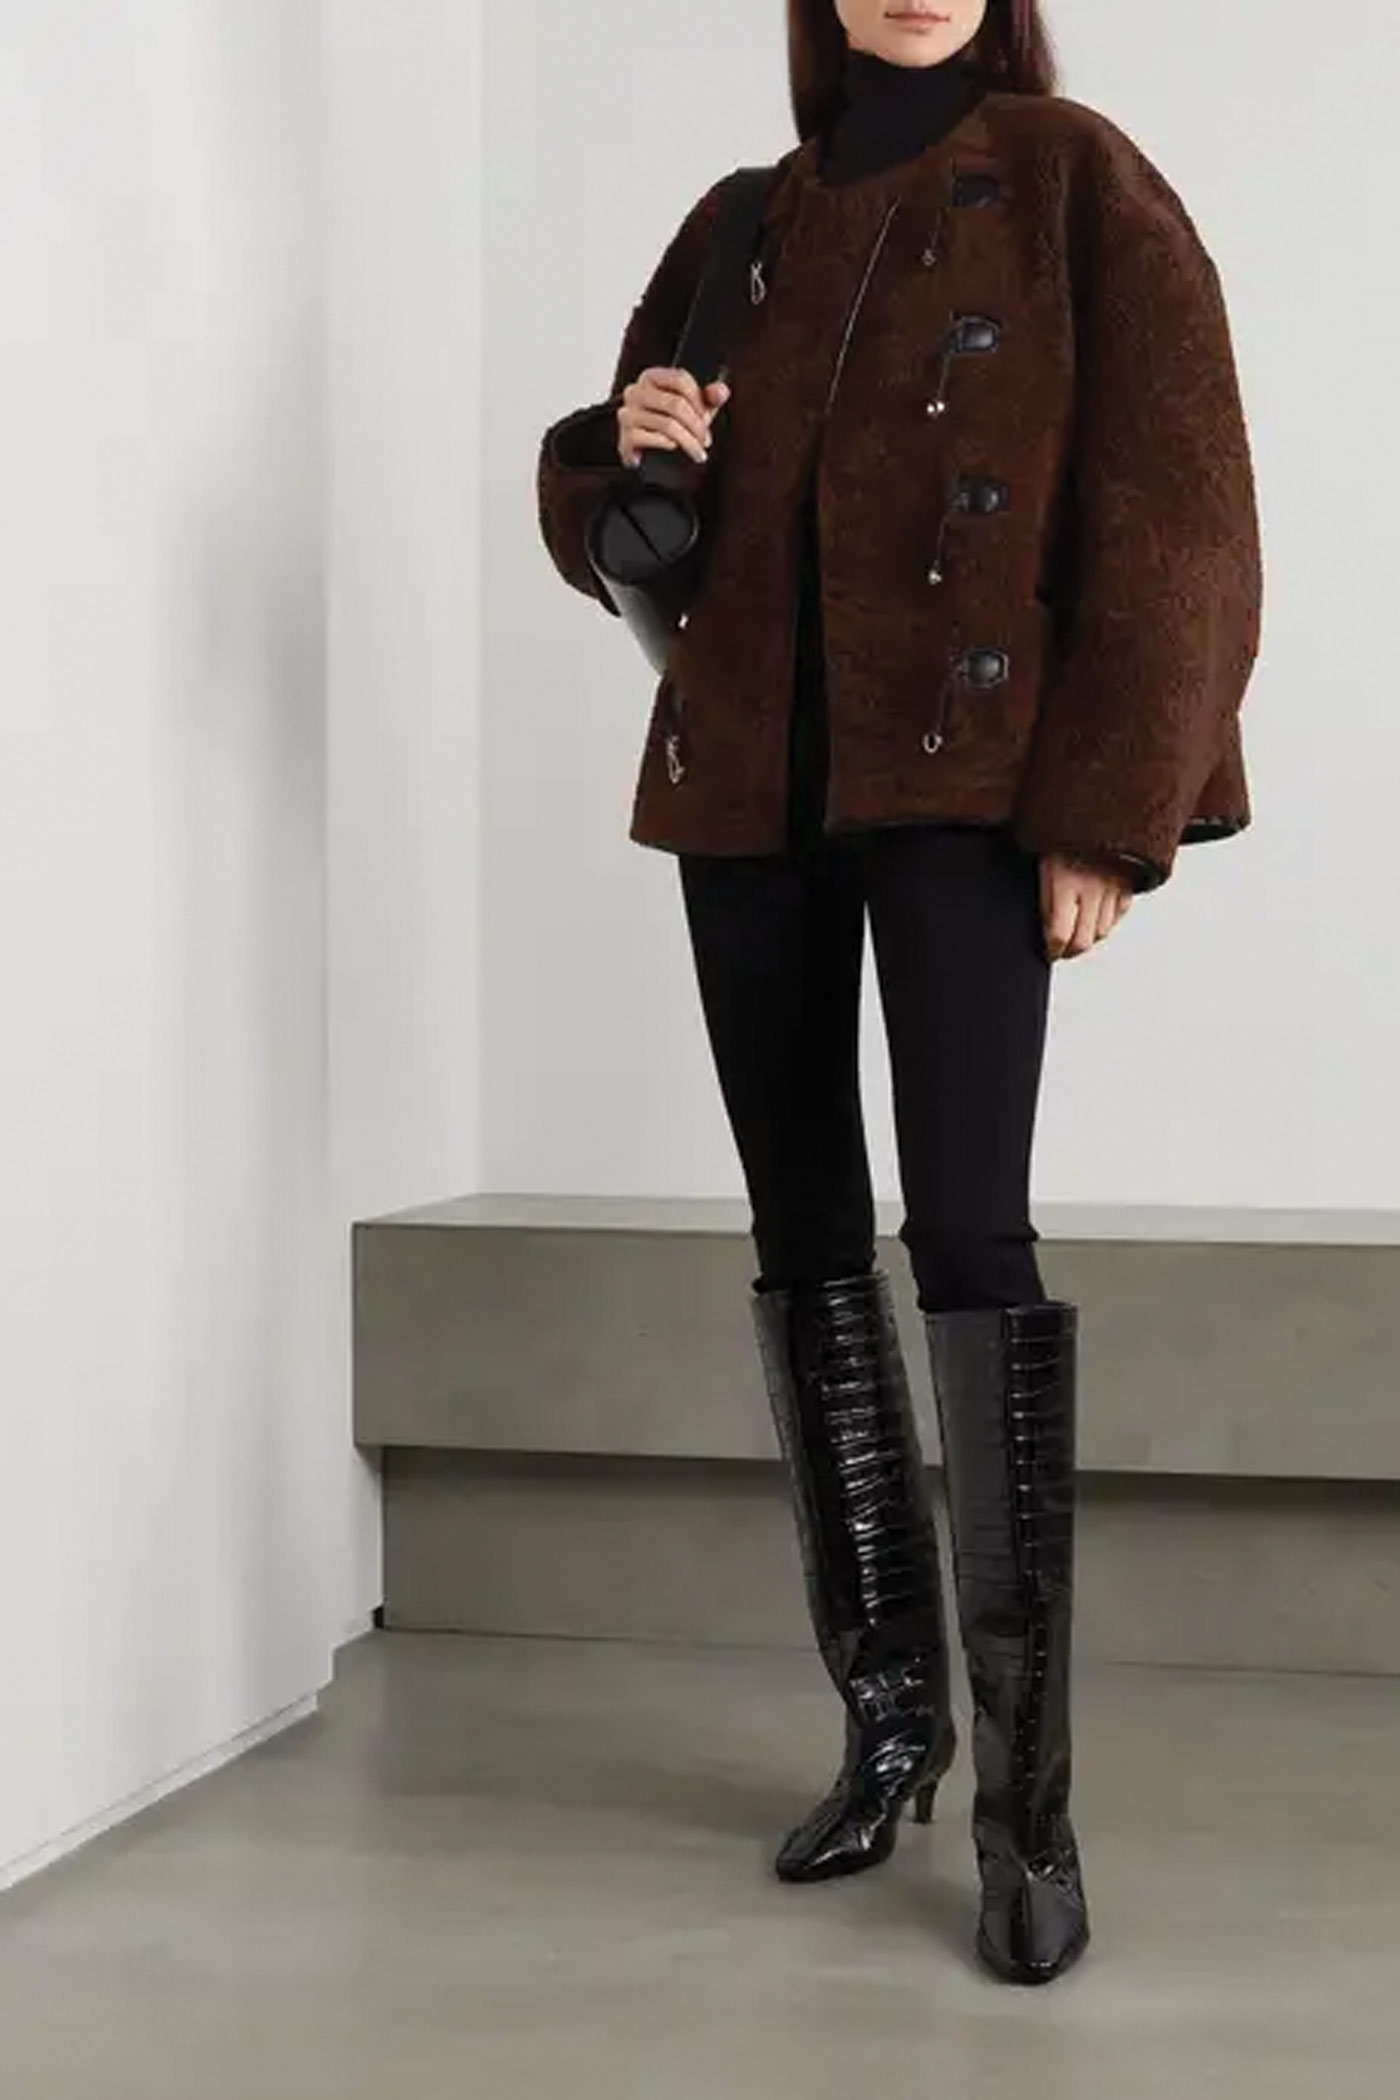 Leather Trimmed Shearling Jacket By Toteme $2,610 Netaporter.com